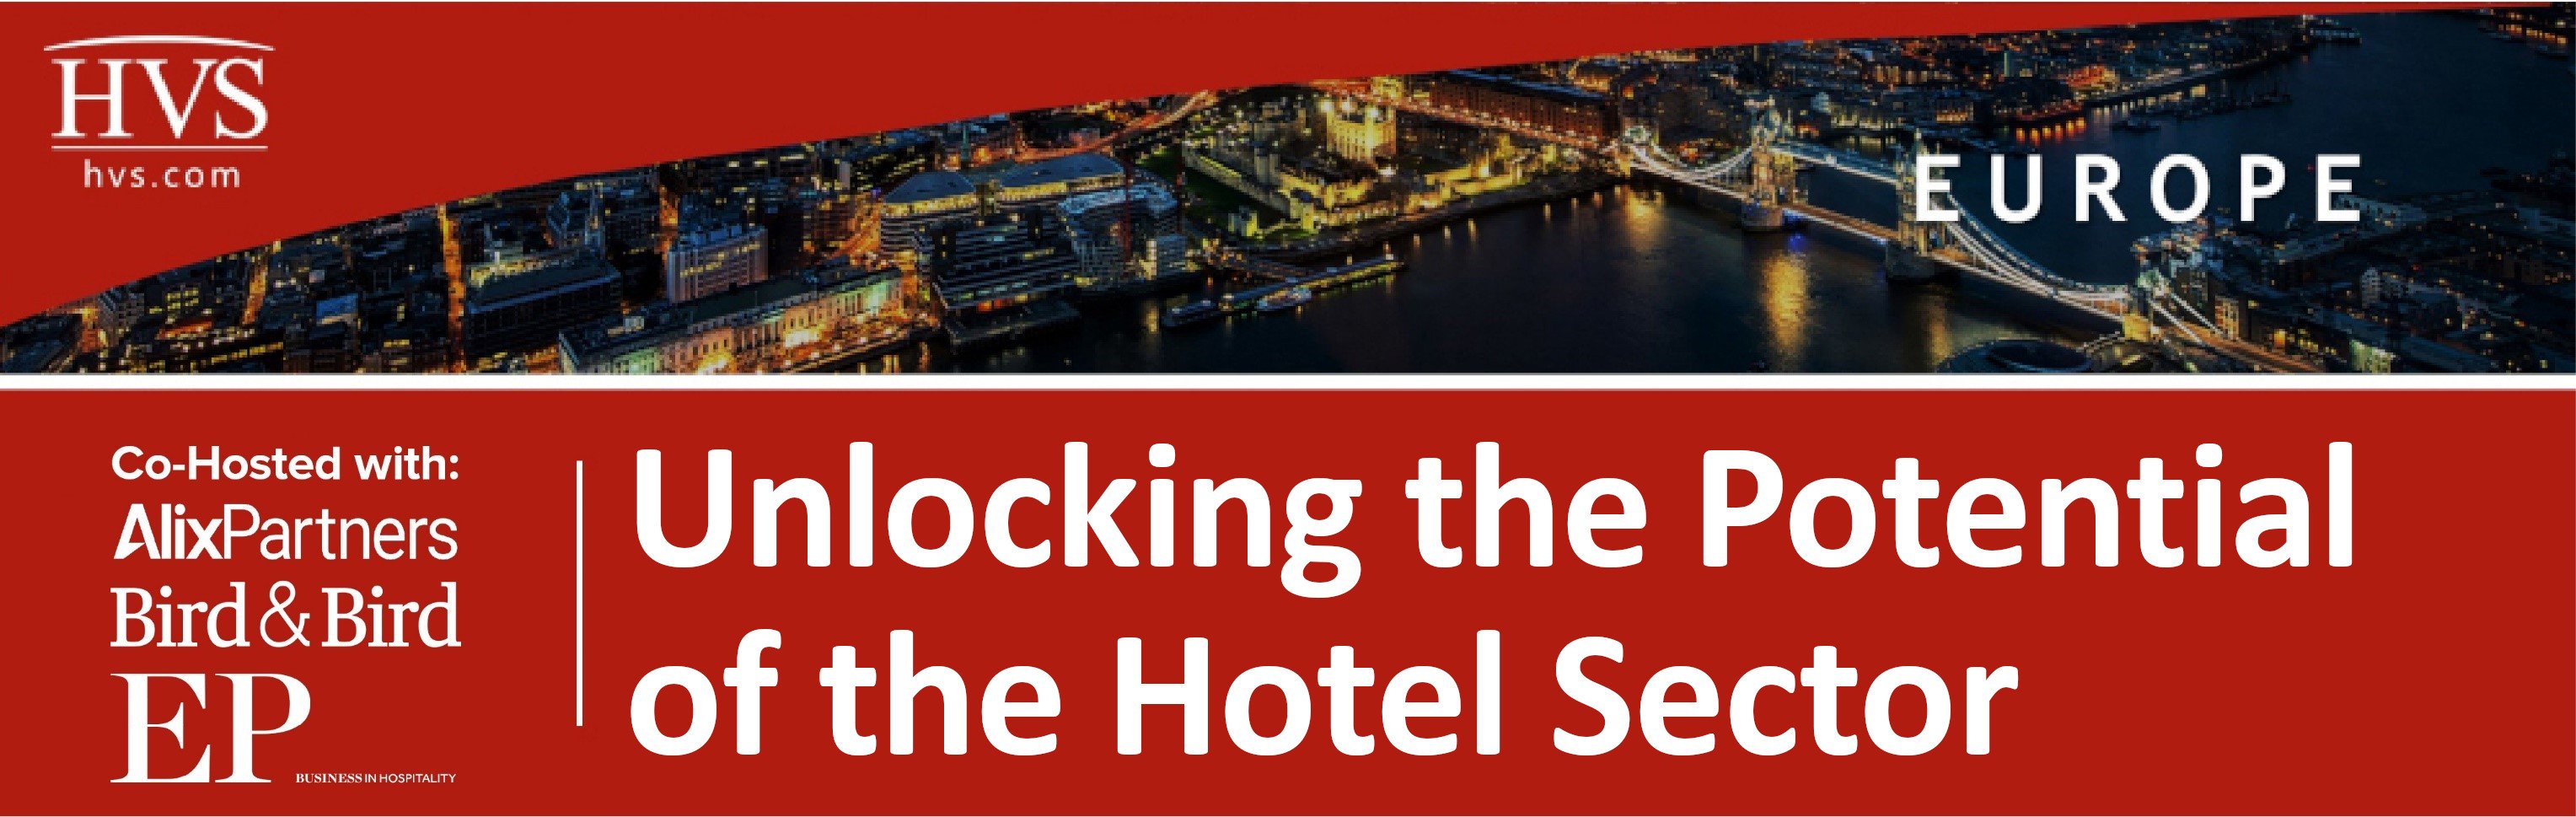 Unlocking the Potential of the Hotel Sector